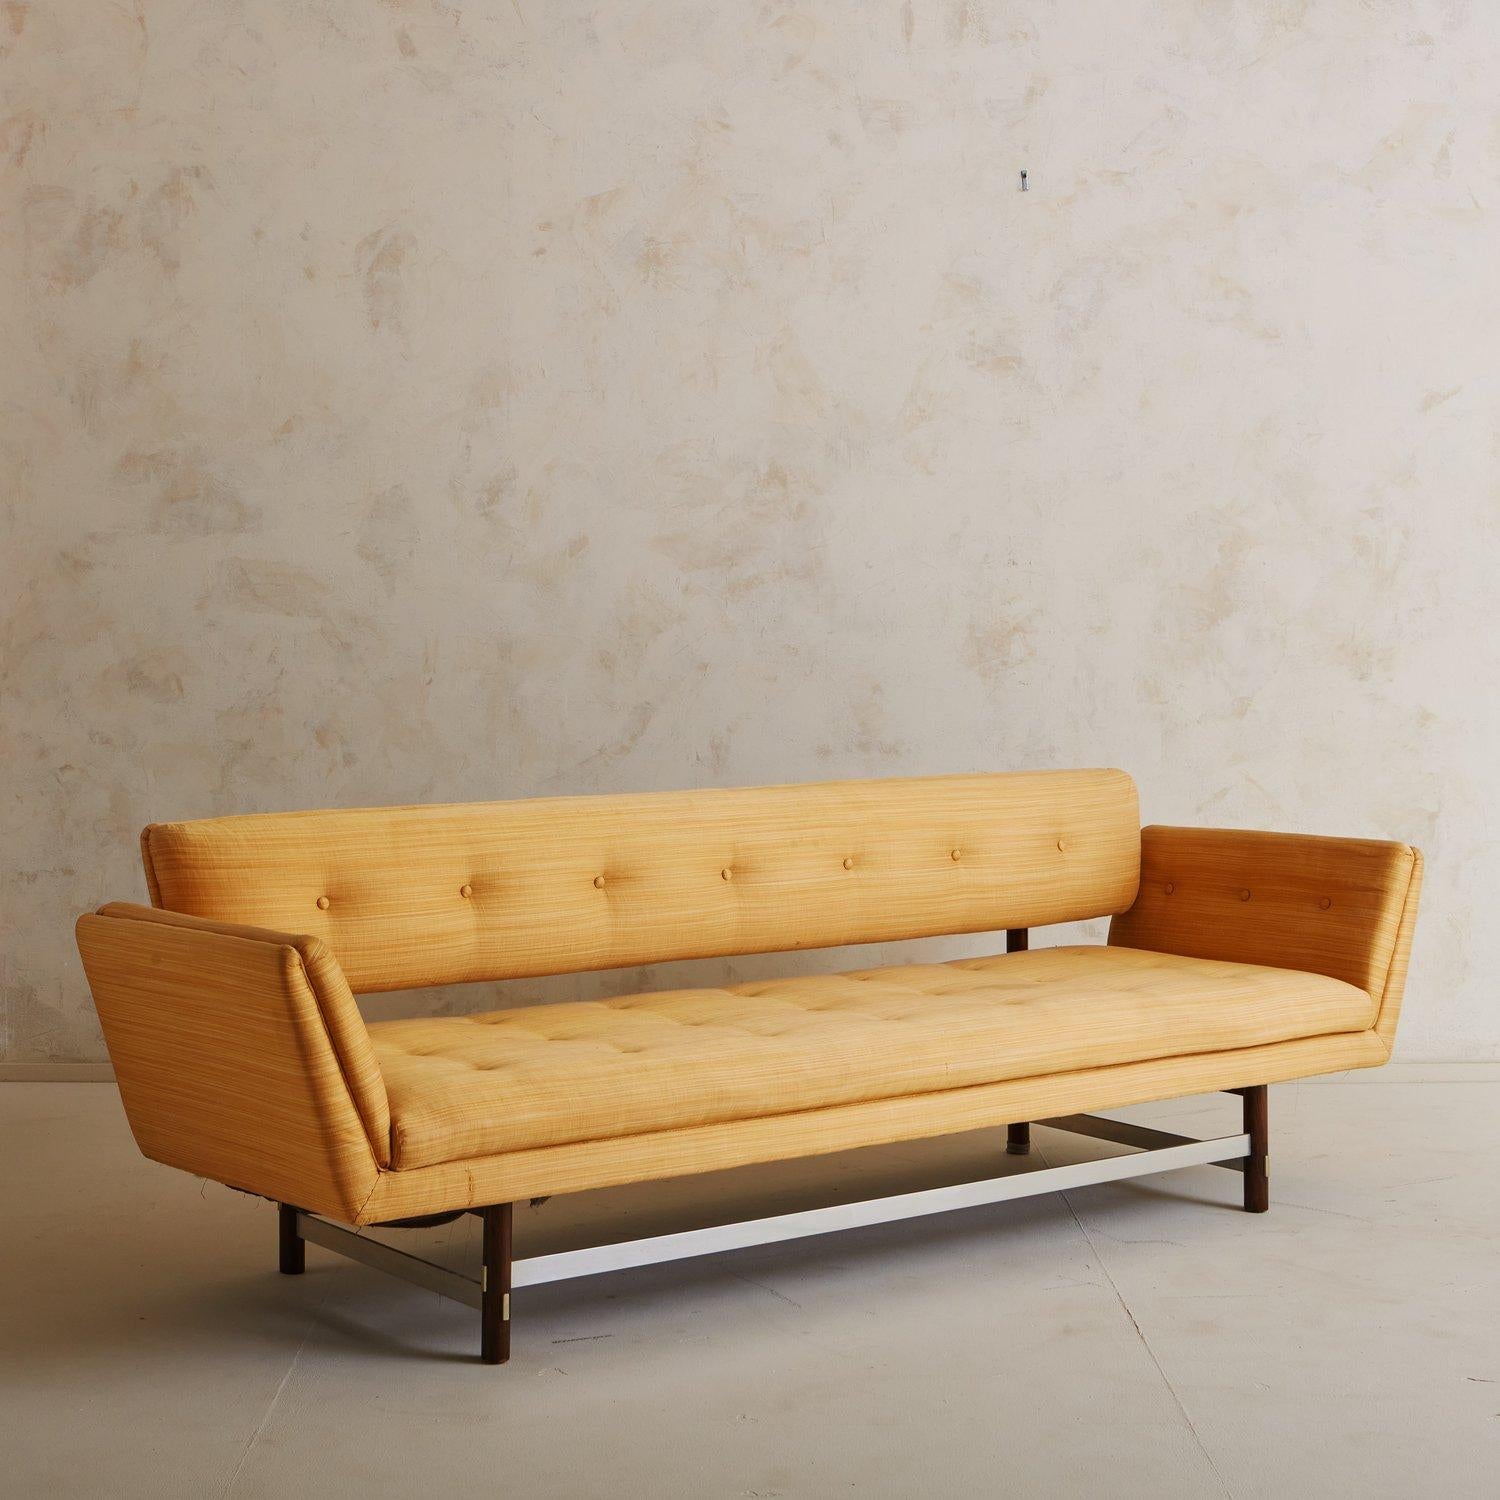 A Gondola sofa designed by Edward Wormley for Dunbar’s Janus Collection in the 1950s. This sculptural sofa features angled arms and a floating back attached to the base with walnut supports and brass hardware. It has four cylindrical walnut legs